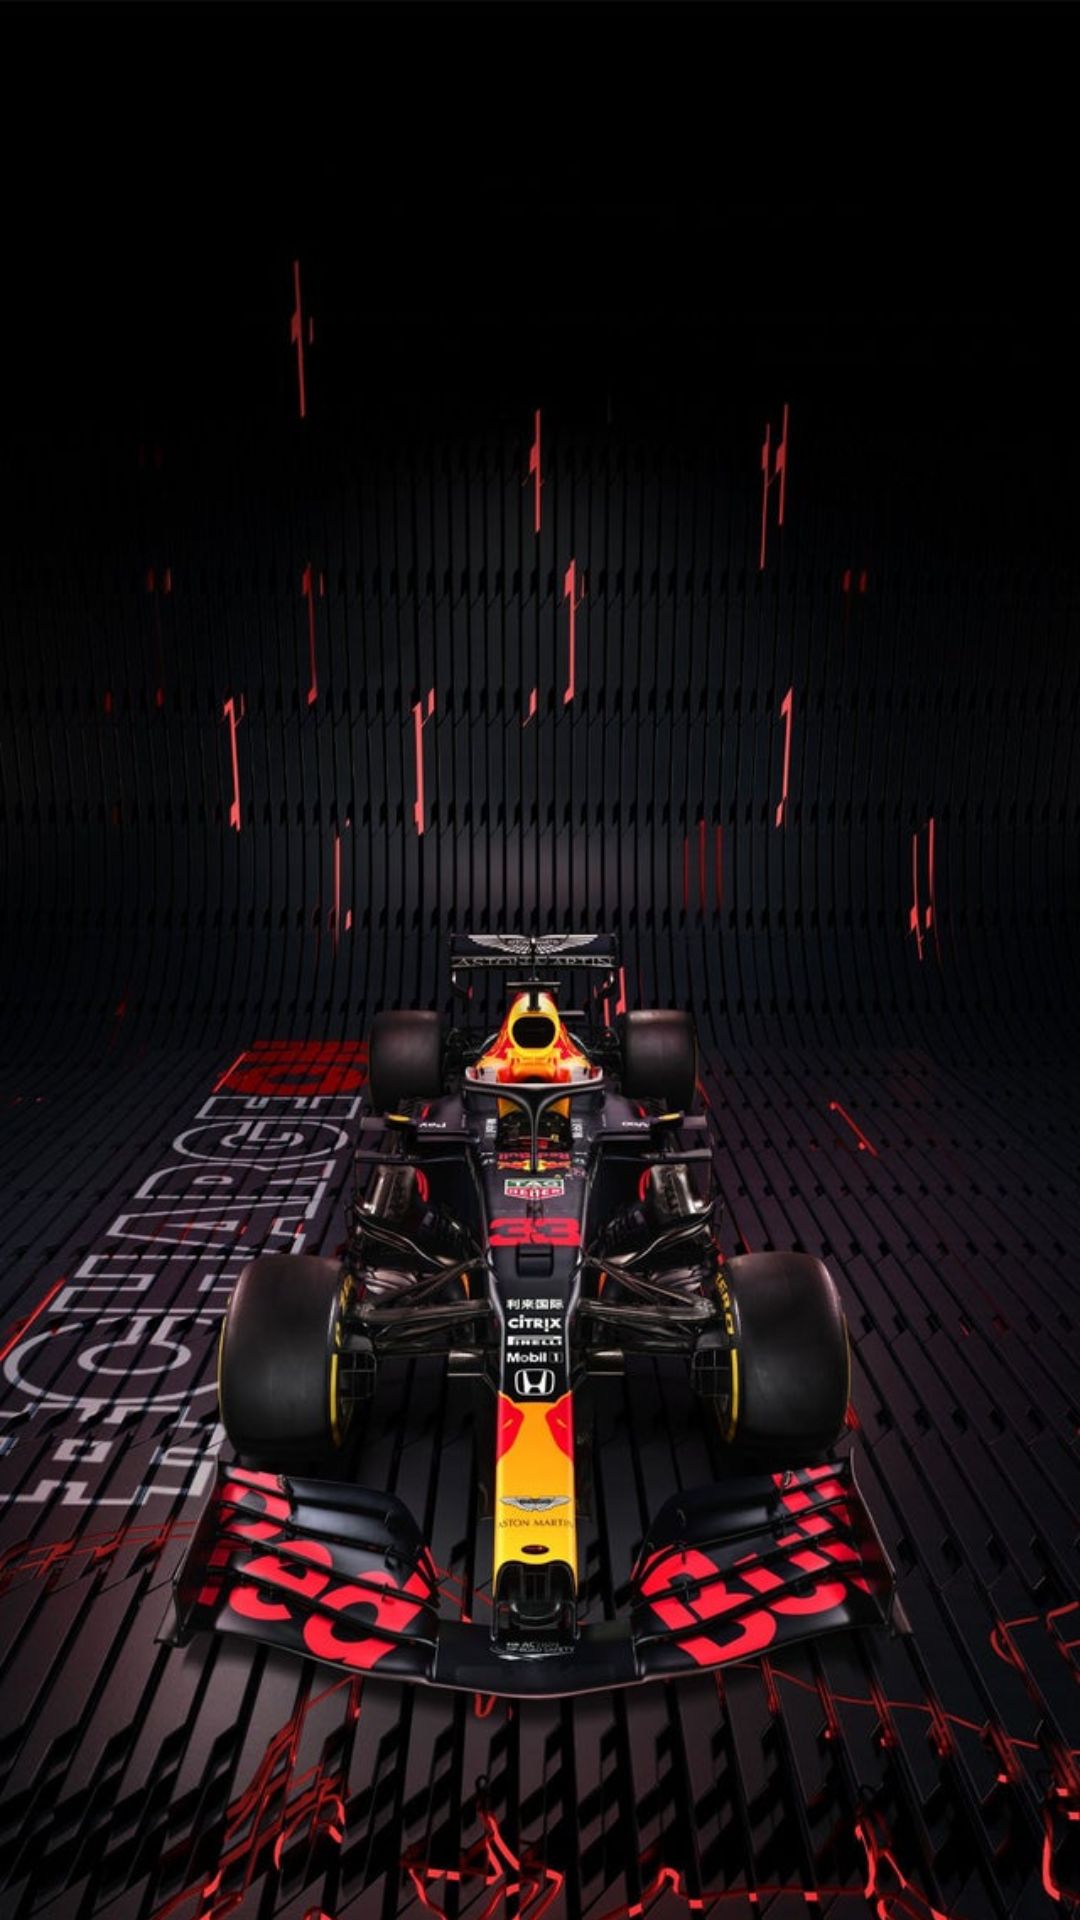 Red Bull F1 Racing Wallpapers - Top 30 Best Red Bull F1 Racing Wallpapers  Download